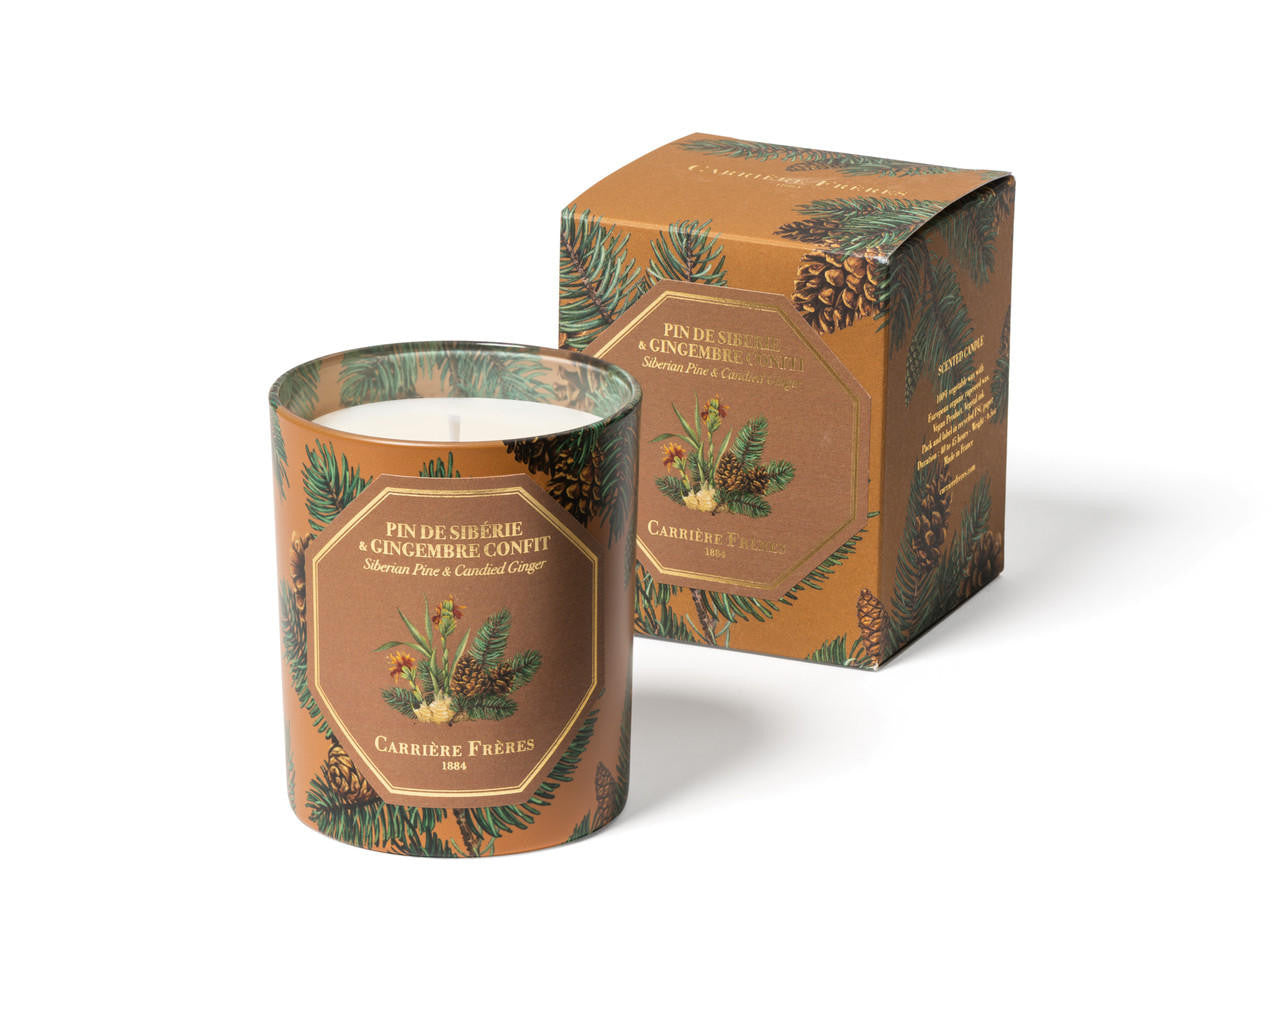  Carriere Freres - Siberian Pine & Candied Ginger Candle 6.5oz 